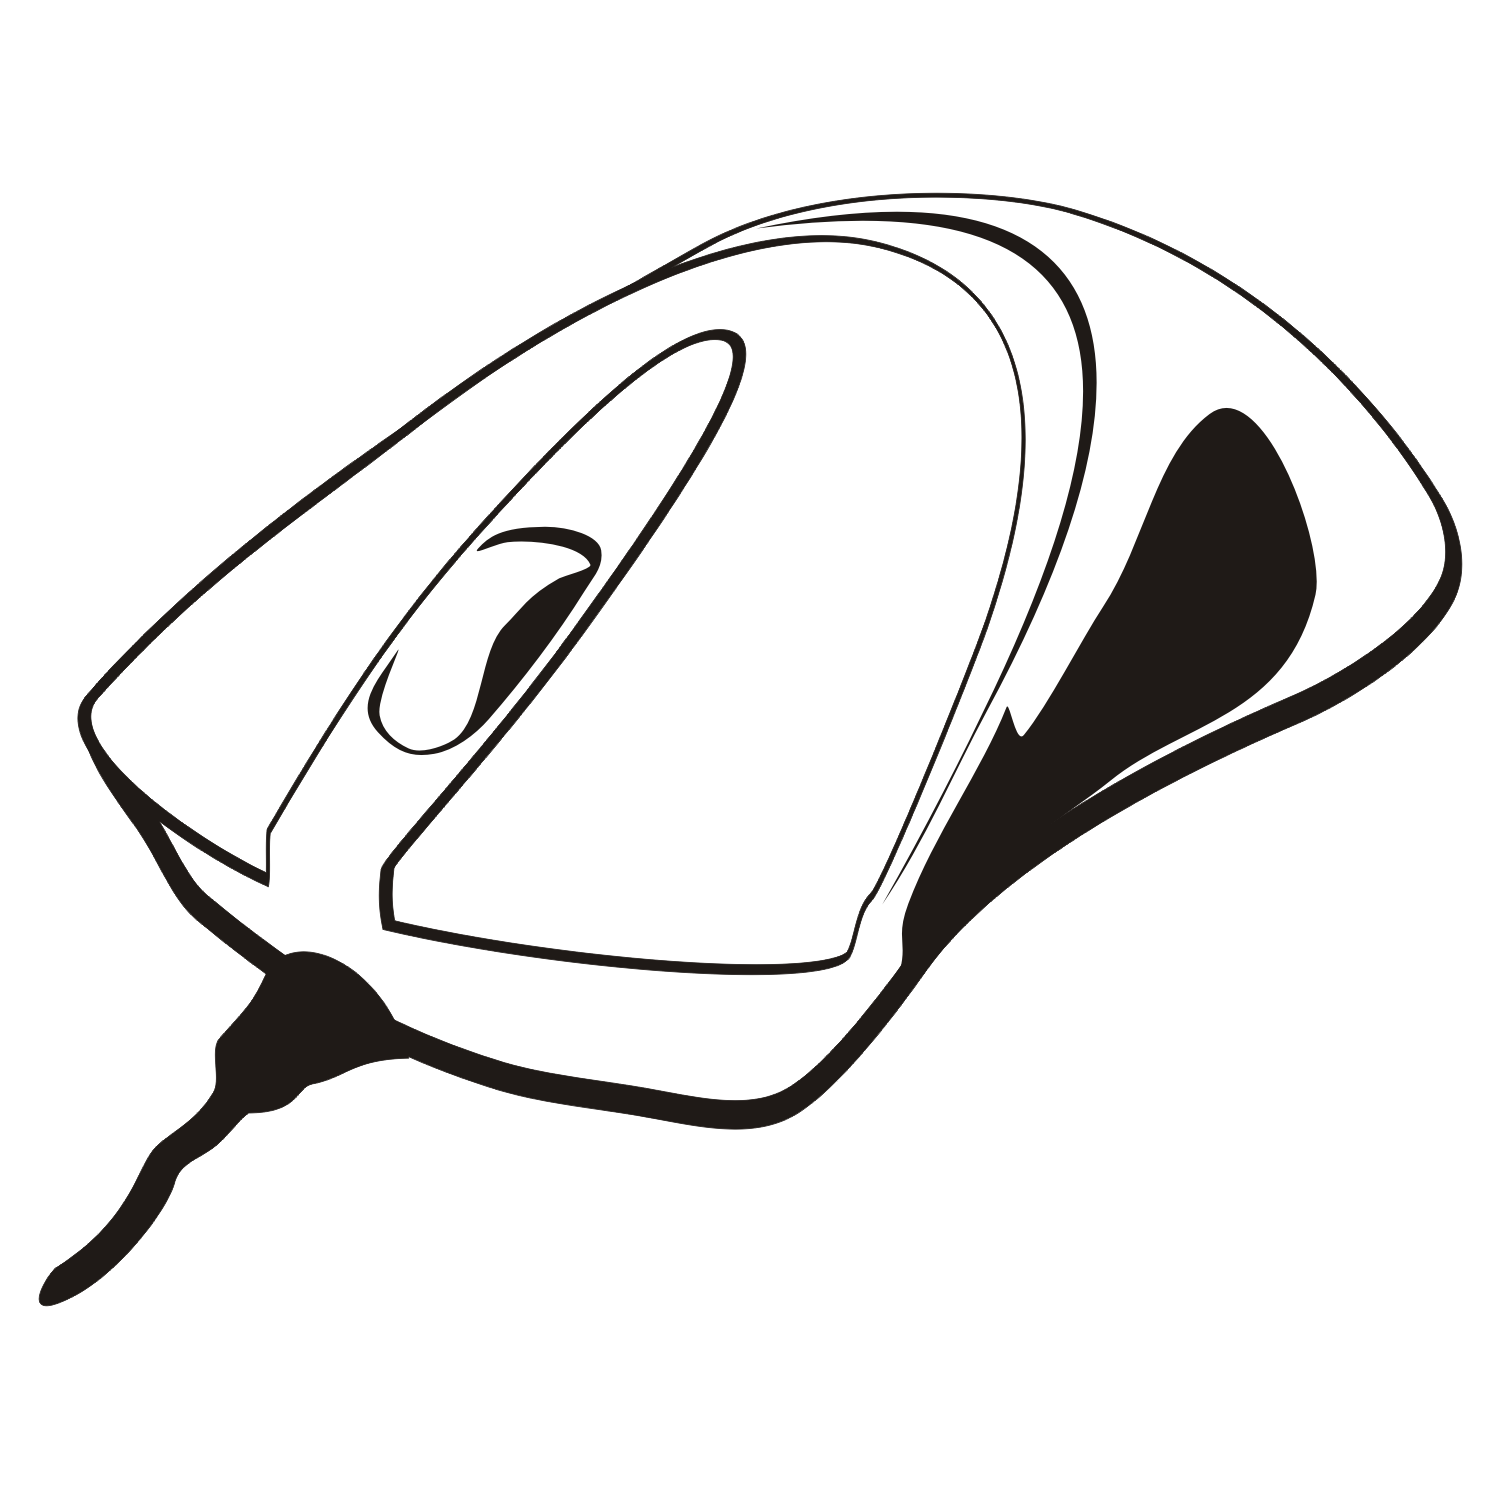 Computer Mouse A Paper Stock Illustrations, Cliparts and Royalty Free Computer  Mouse A Paper Vectors